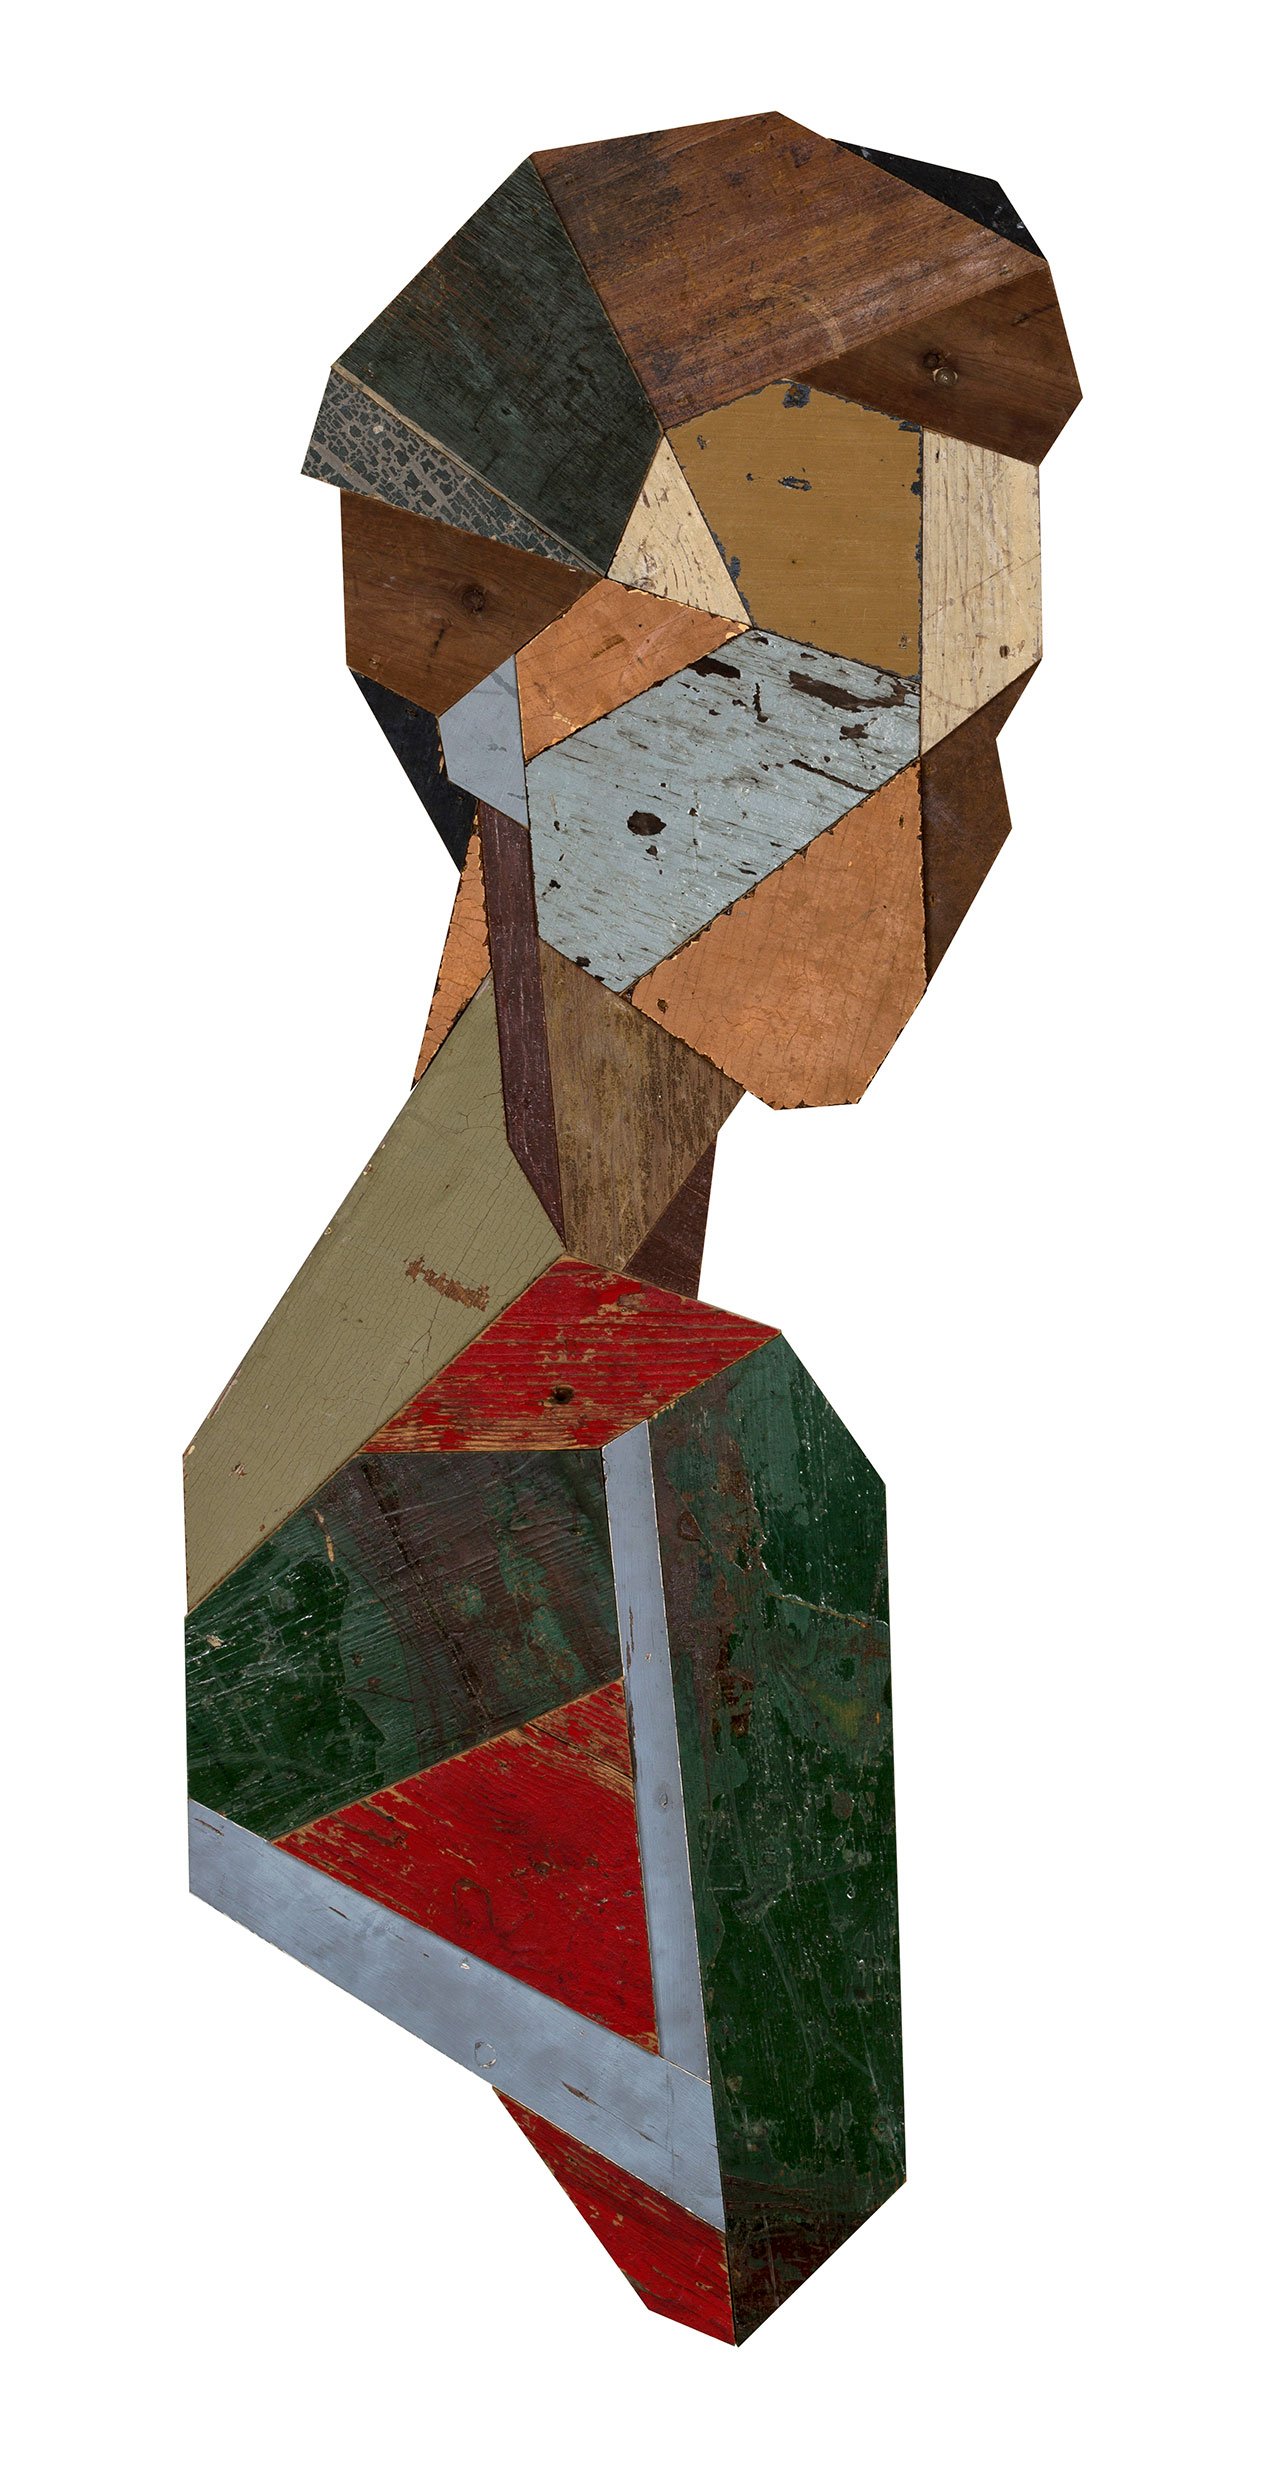 Miss Gloria, 2015. Recycled wood sculpture, 112 x 51,5 cm. Photo © Strook.